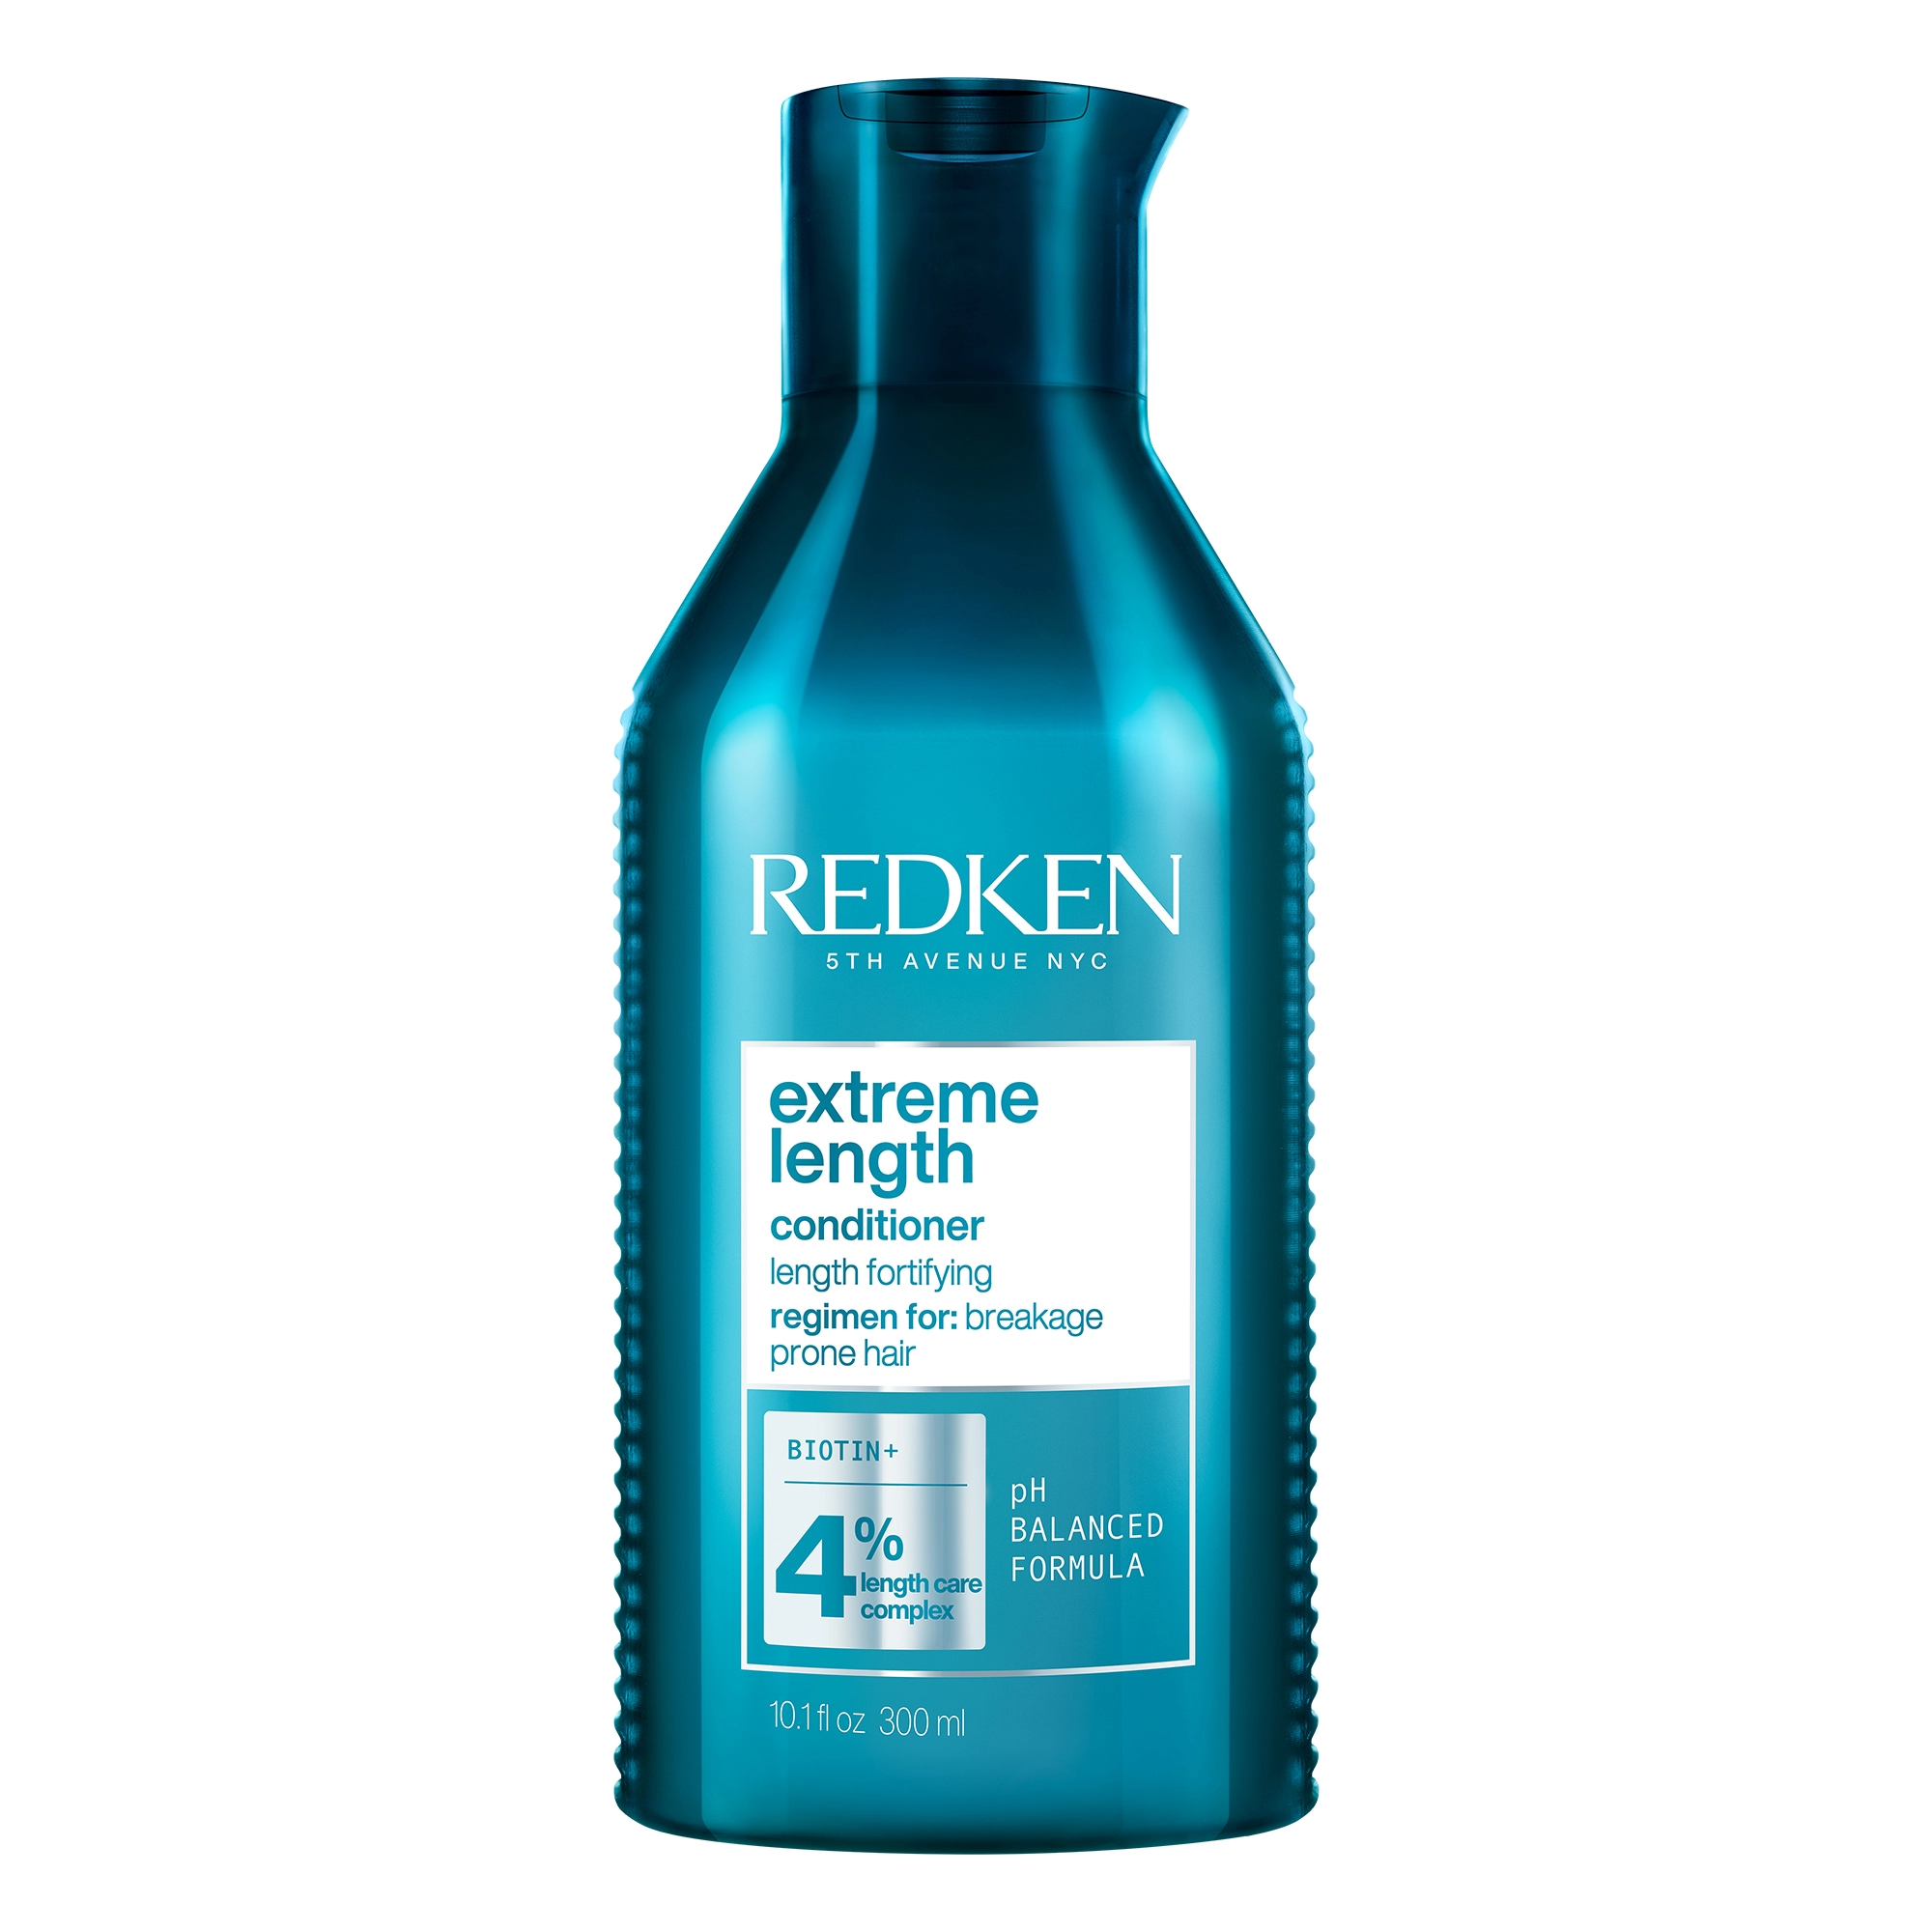 Redken-2020-Extreme-Length-Conditioner-Product-Shot-2000×2000